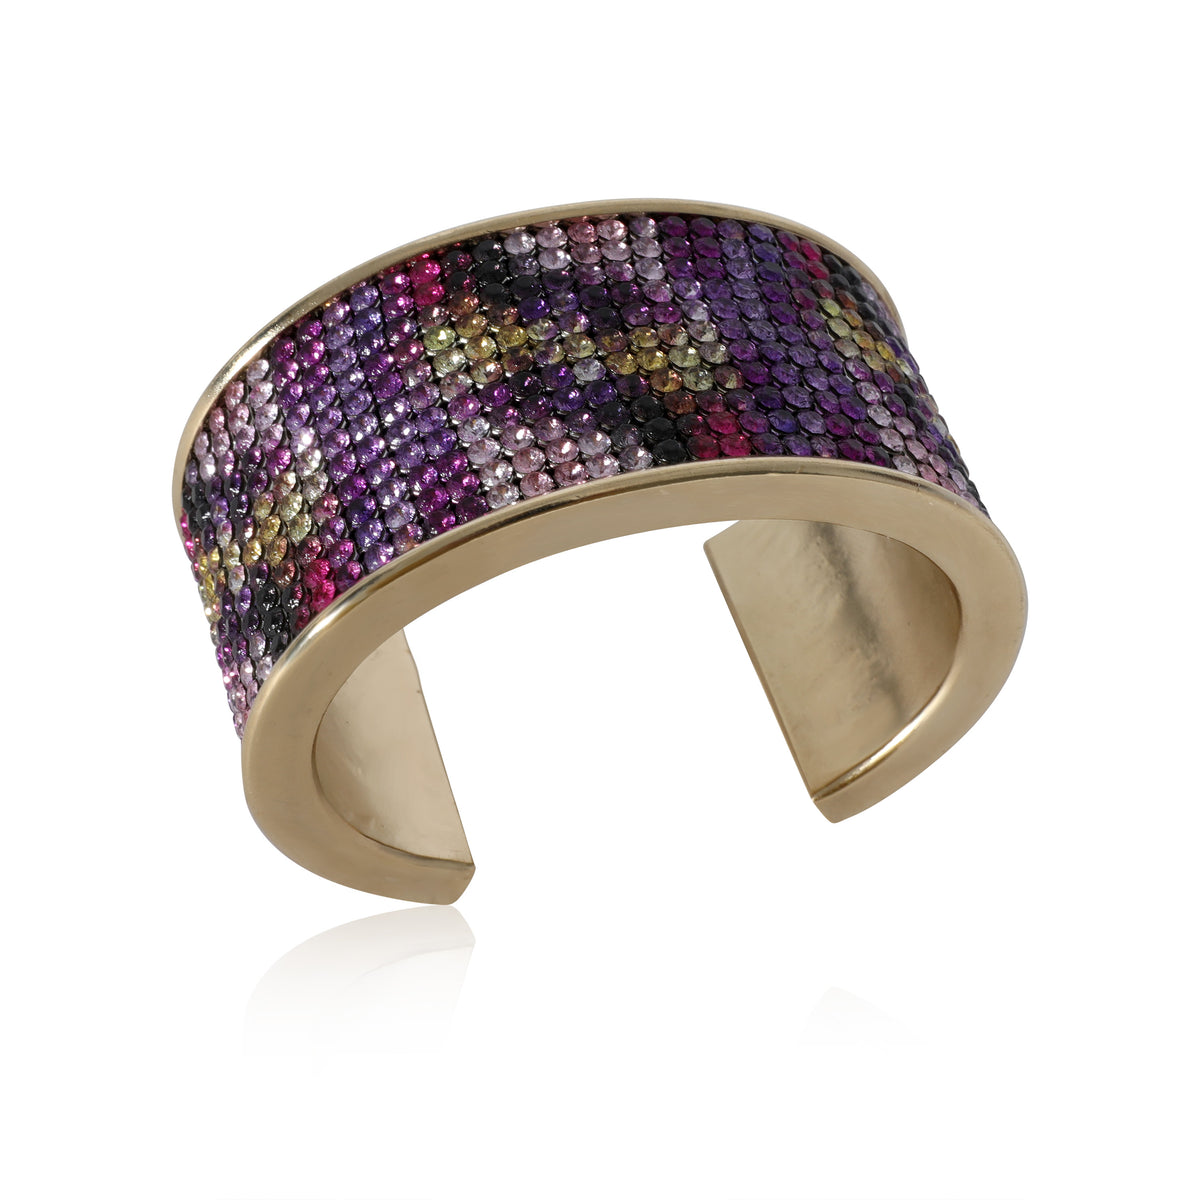 2015 Multi-Color Strass Wide Gold Plated Cuff Bracelet